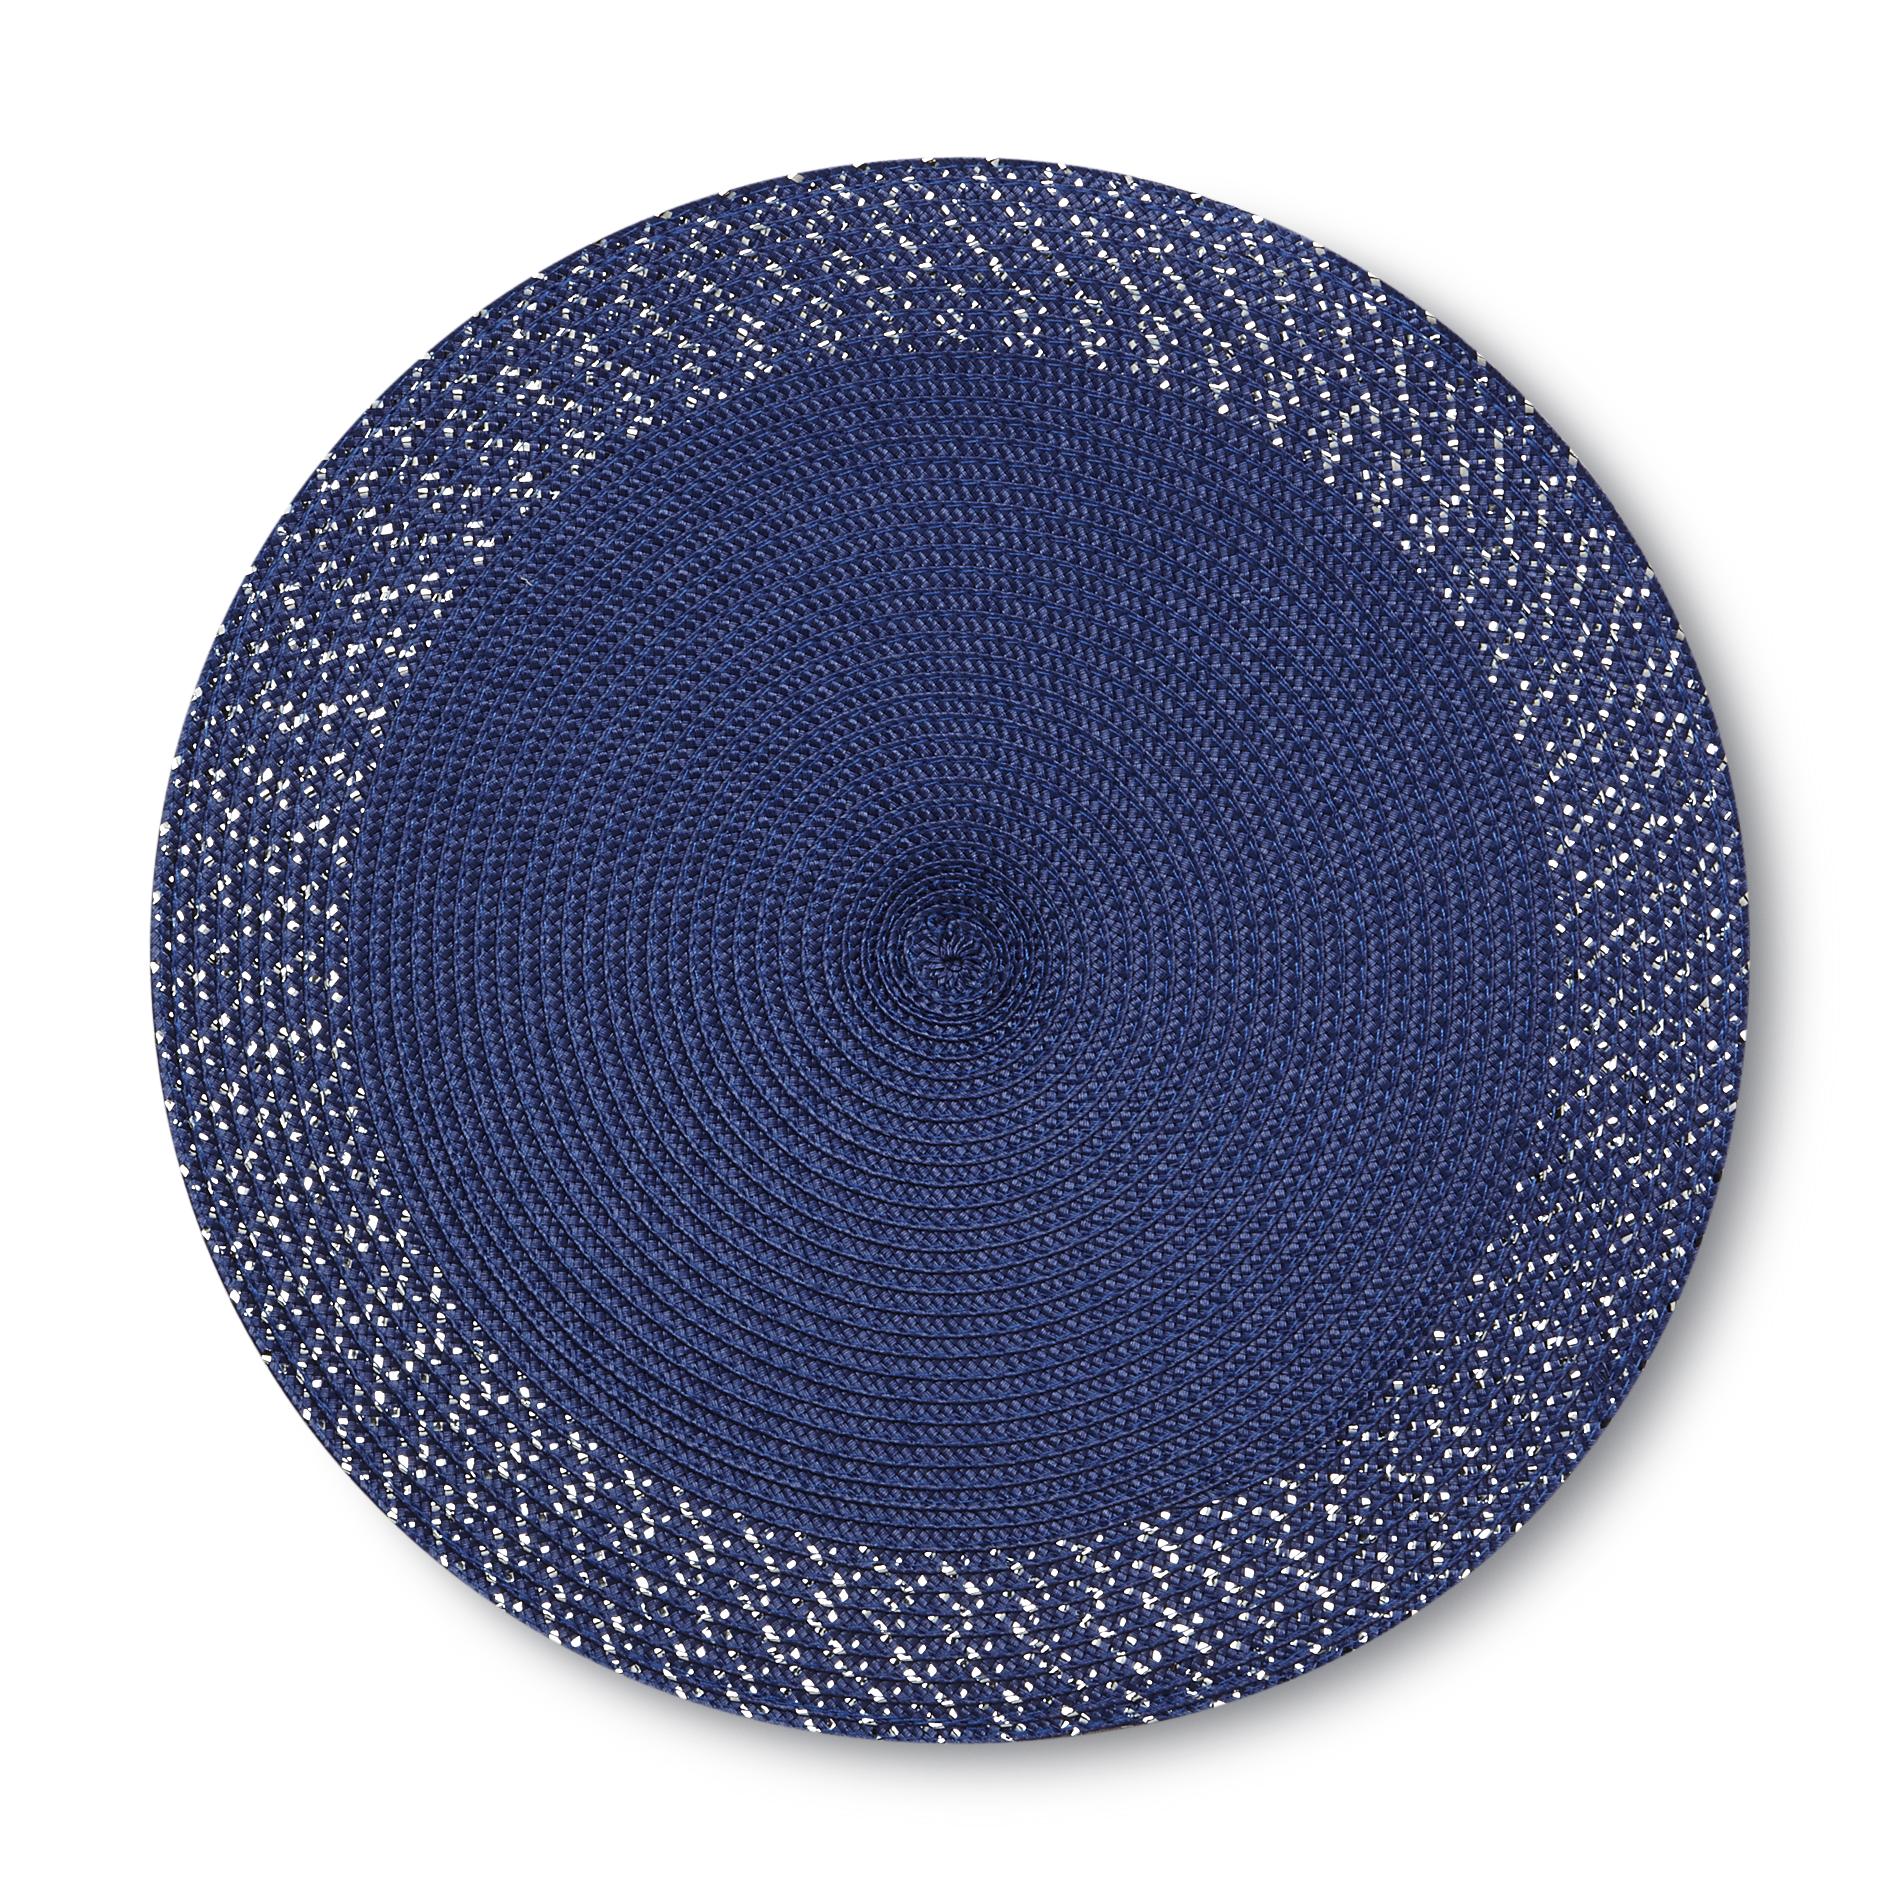 Essential Home Metallic Accent Spiral Woven Round Place Mat